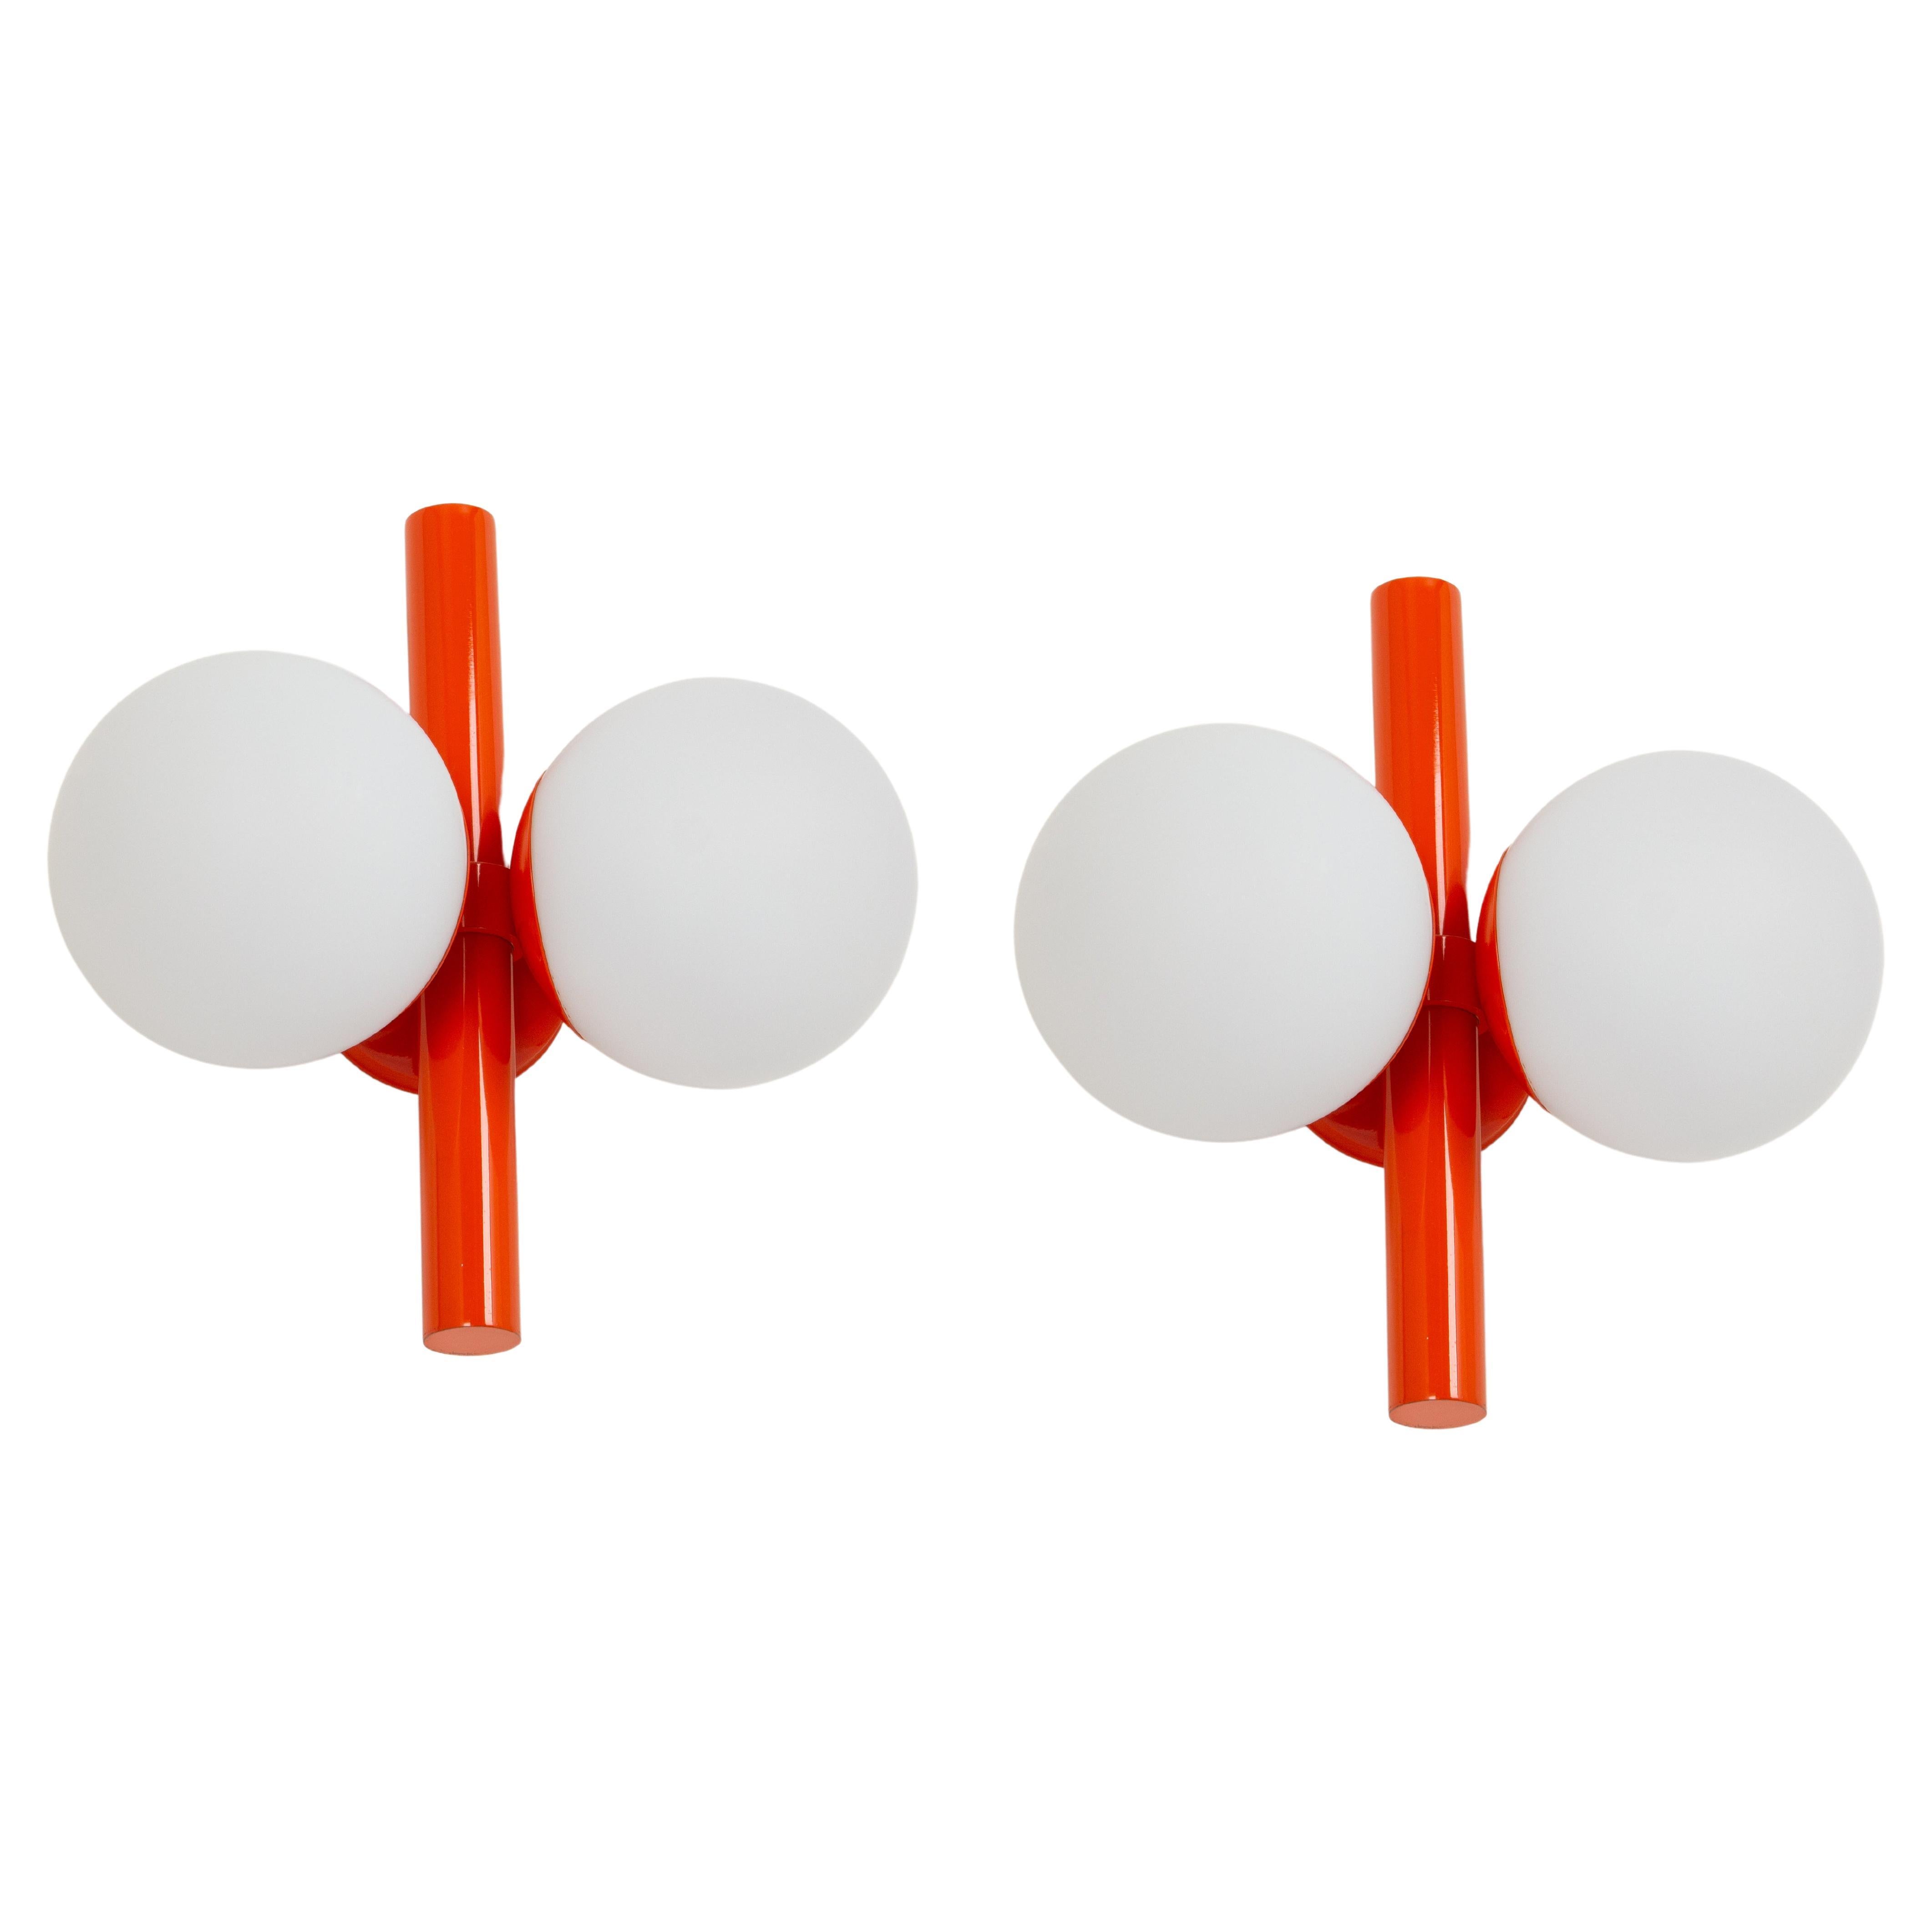 1 of 3 mid-century vintage wall lights in orange color made by Kaiser Leuchten, Germany, with two opal glass balls.
High quality and in very good condition. Cleaned, well-wired, and ready to use. 

Each fixture requires 2 x E14 small bulbs with 40W